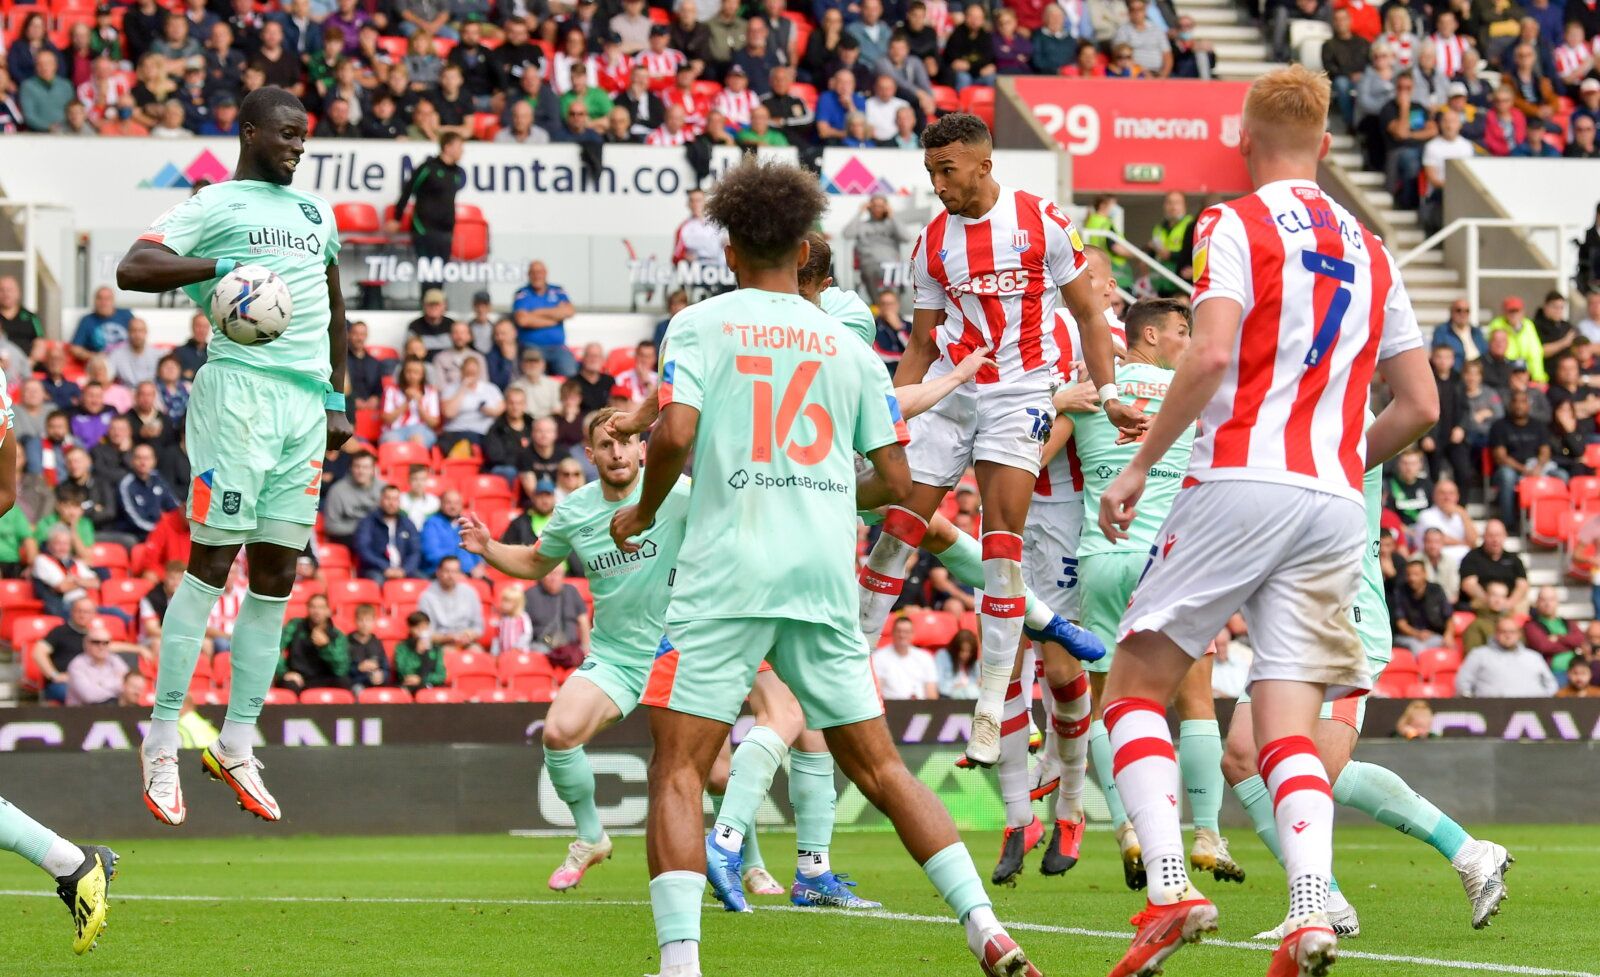 Soccer Football - Championship - Stoke City v Huddersfield Town - bet365 Stadium, Stoke-on-Trent, Britain - September 11, 2021 Stoke City's Jacob Brown scores their first goal Action Images/Paul Burrows  EDITORIAL USE ONLY. No use with unauthorized audio, video, data, fixture lists, club/league logos or 